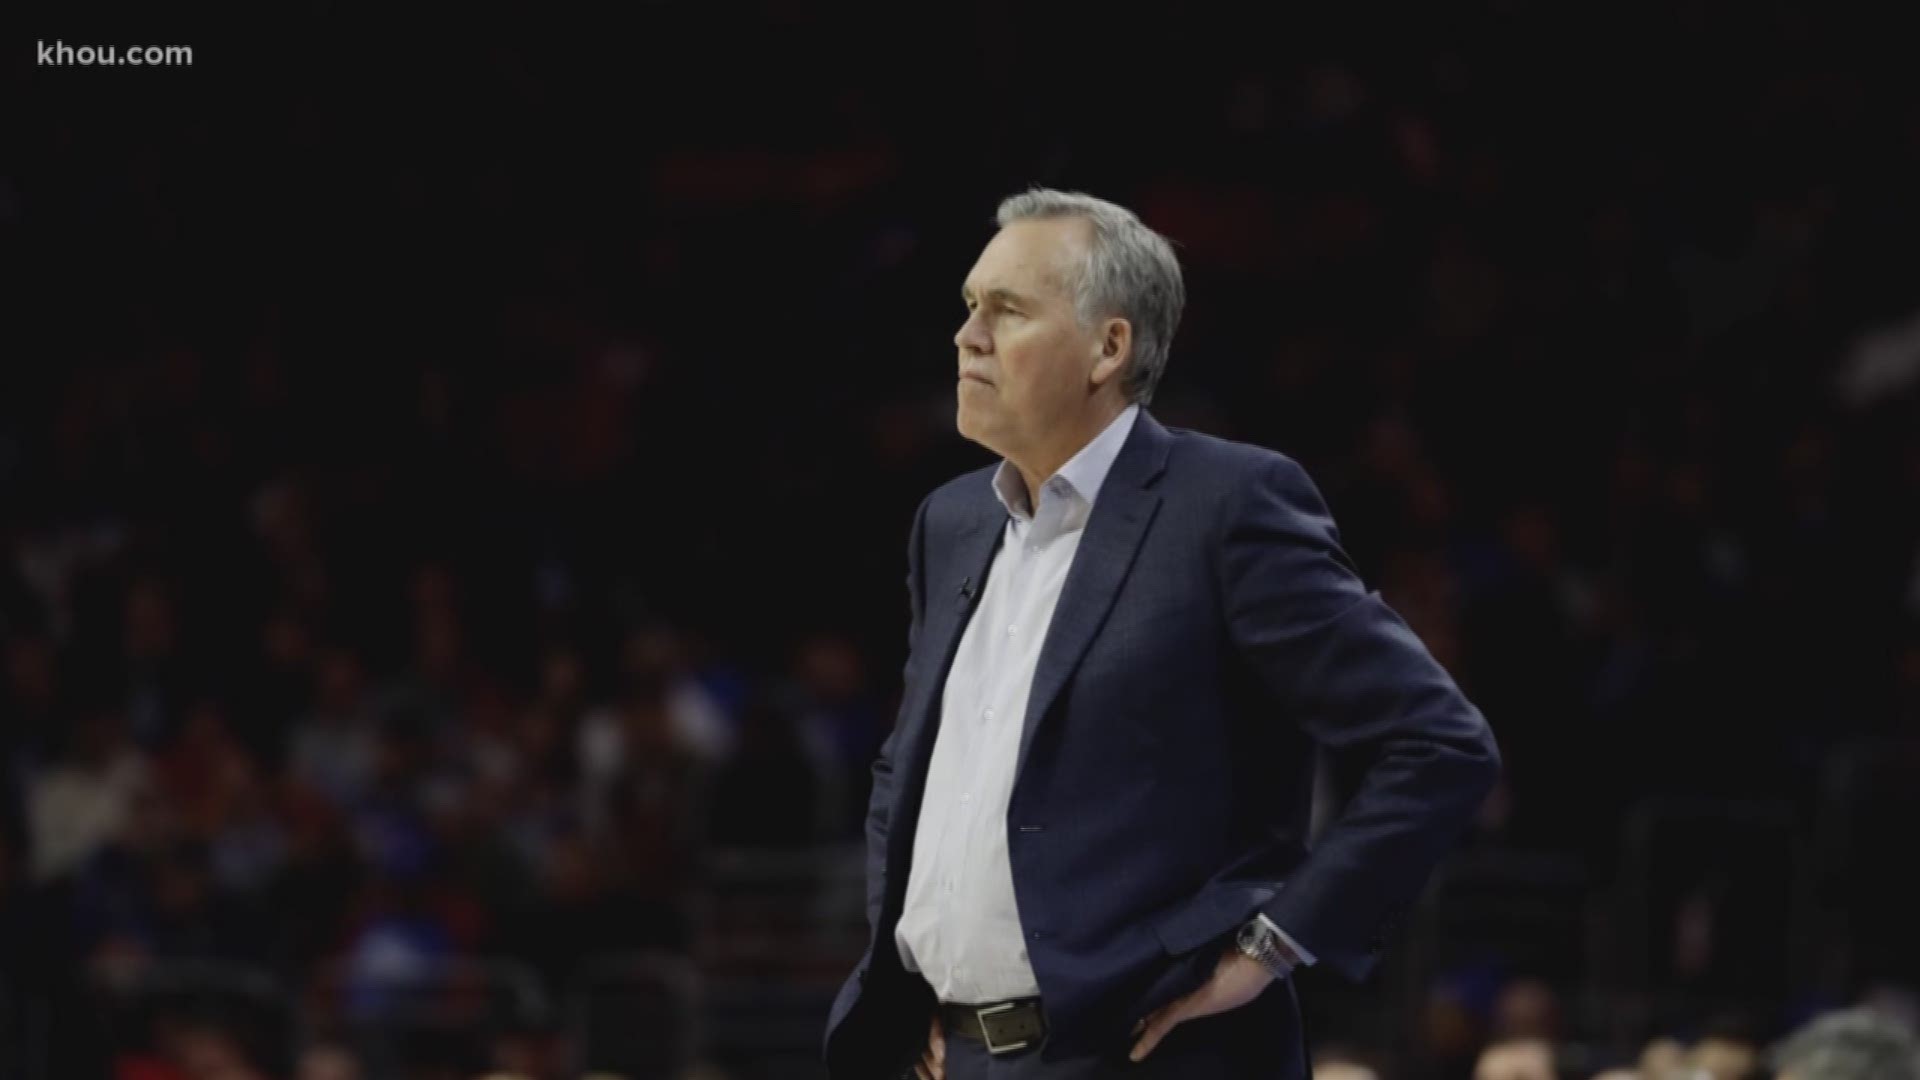 Houston Rockets head coach Mike D’Antoni is no longer in contract extension talks with the team, but Rockets management is hopeful he will stay with Houston beyond next season.